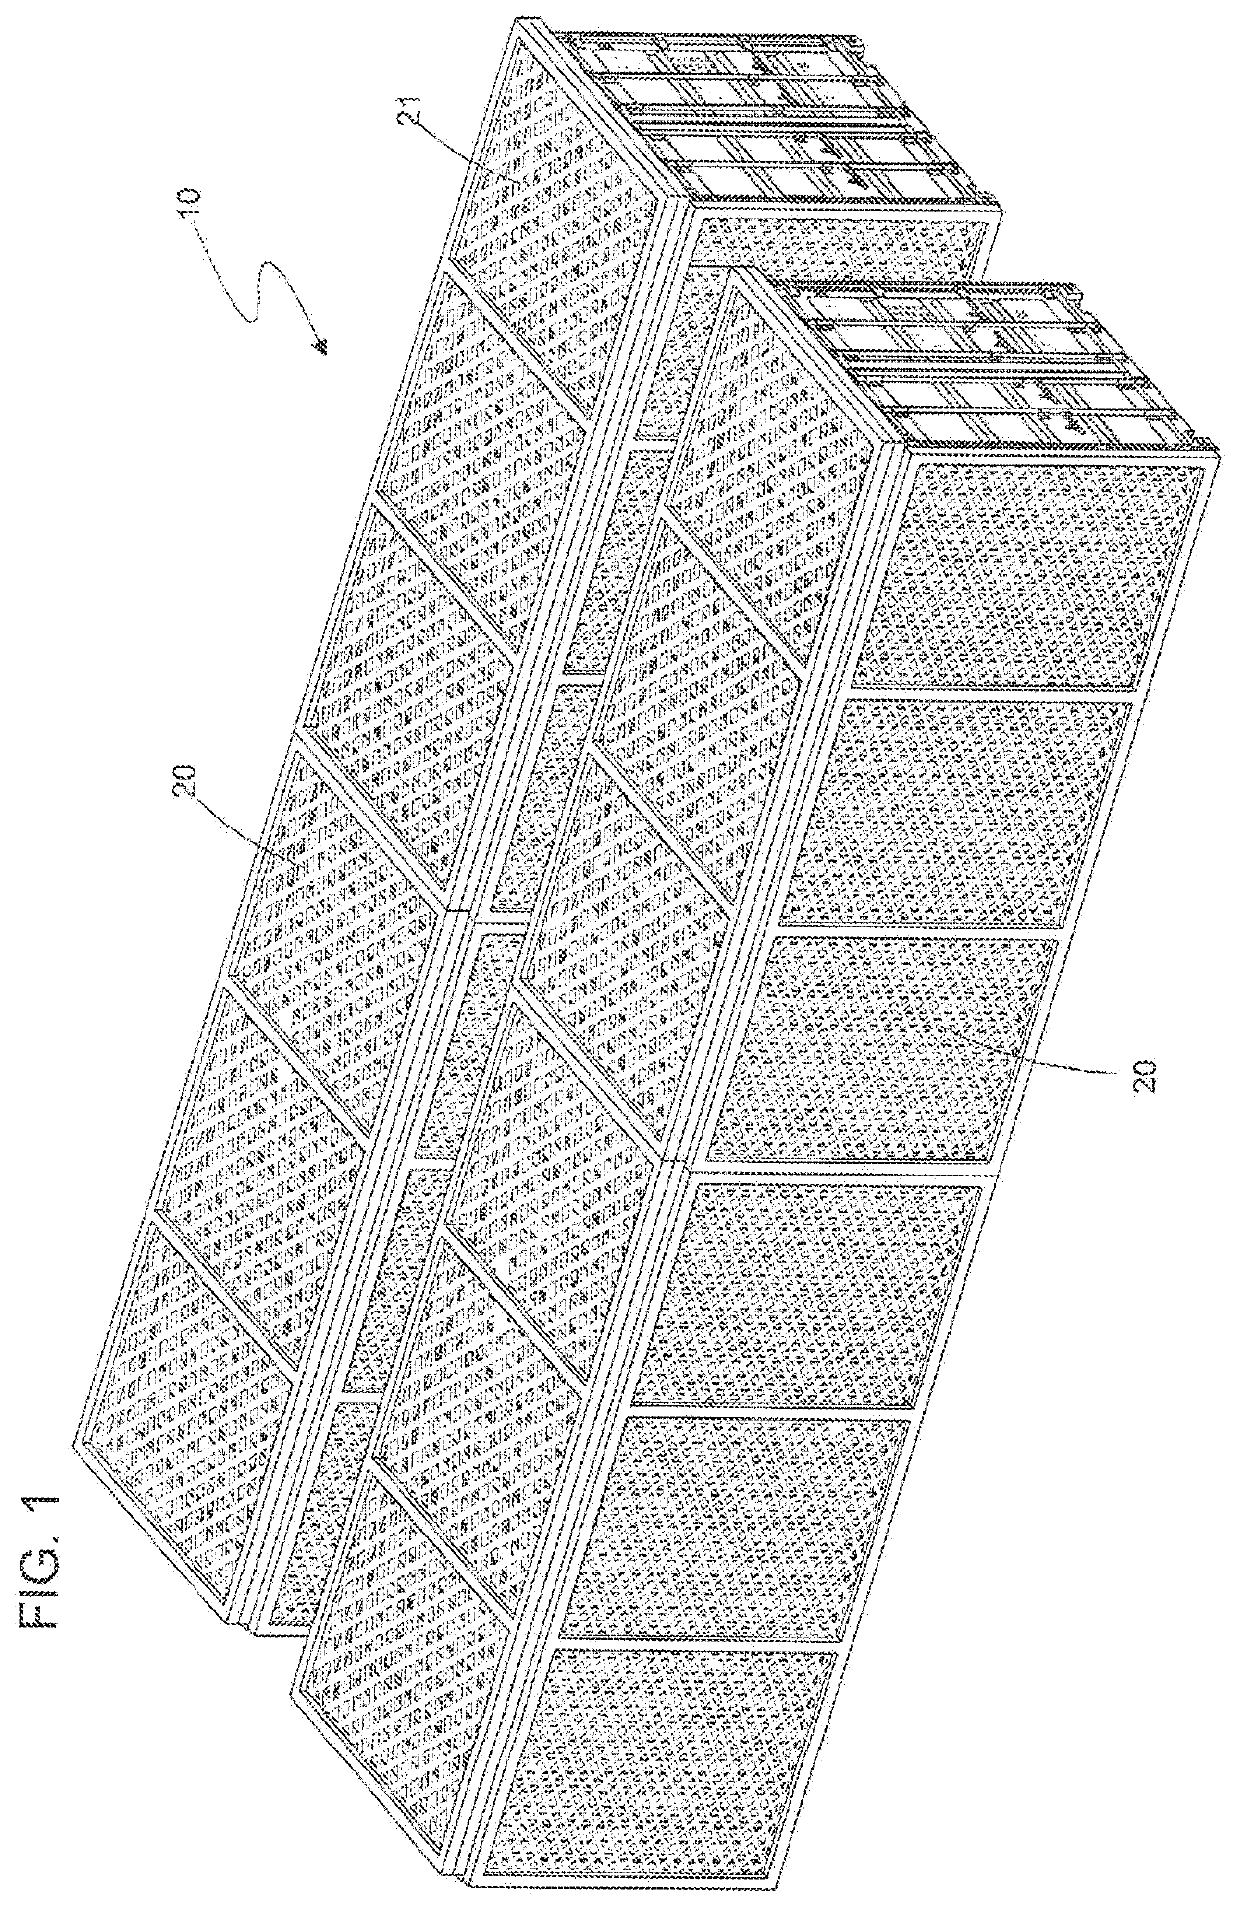 Portable, modular equipment for installation of a multi-sports and/or multi-use area and method of installing a multi-sports and/or multi-use area